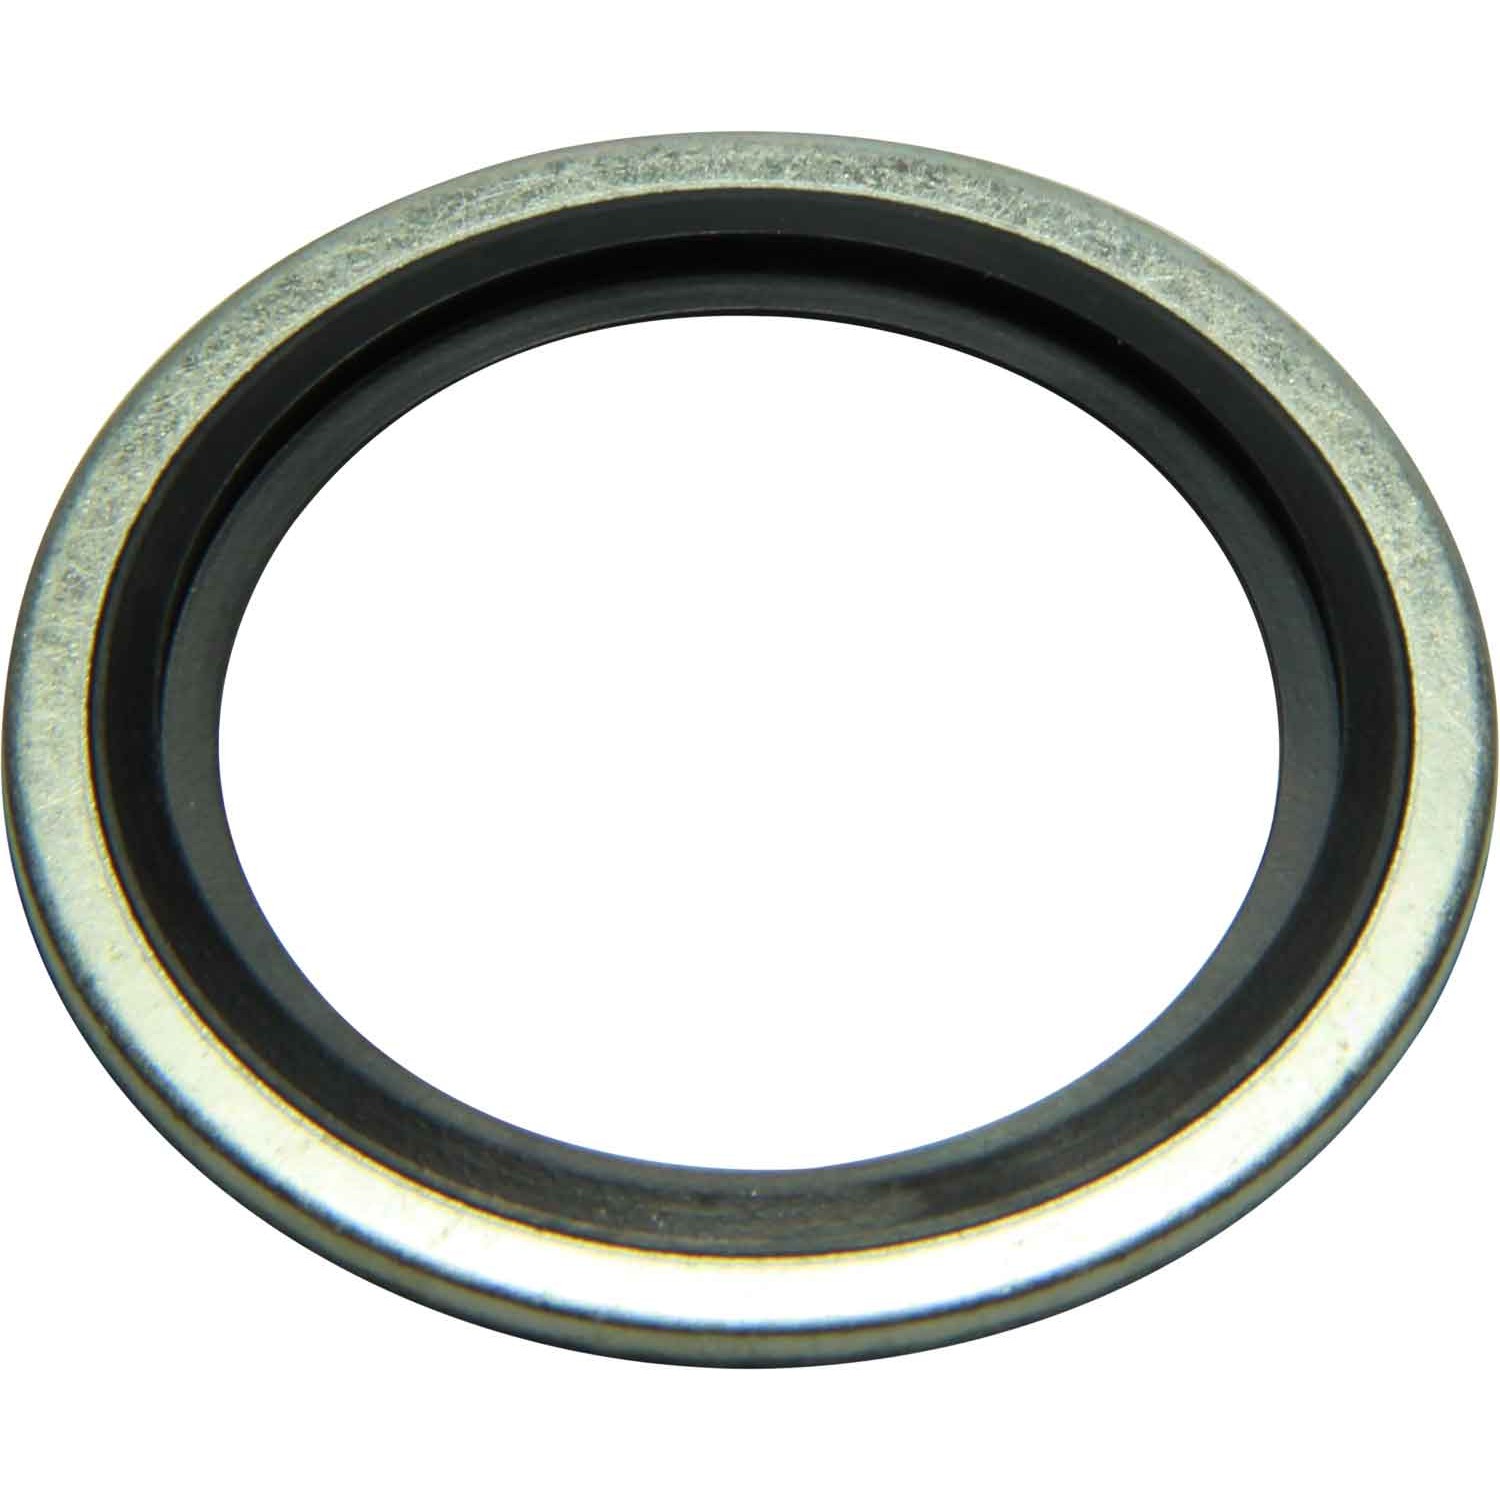 Oil,Fuel Resistant Top Quality Water Details about   Dowty seal bonded washer Pack of 8 M20 